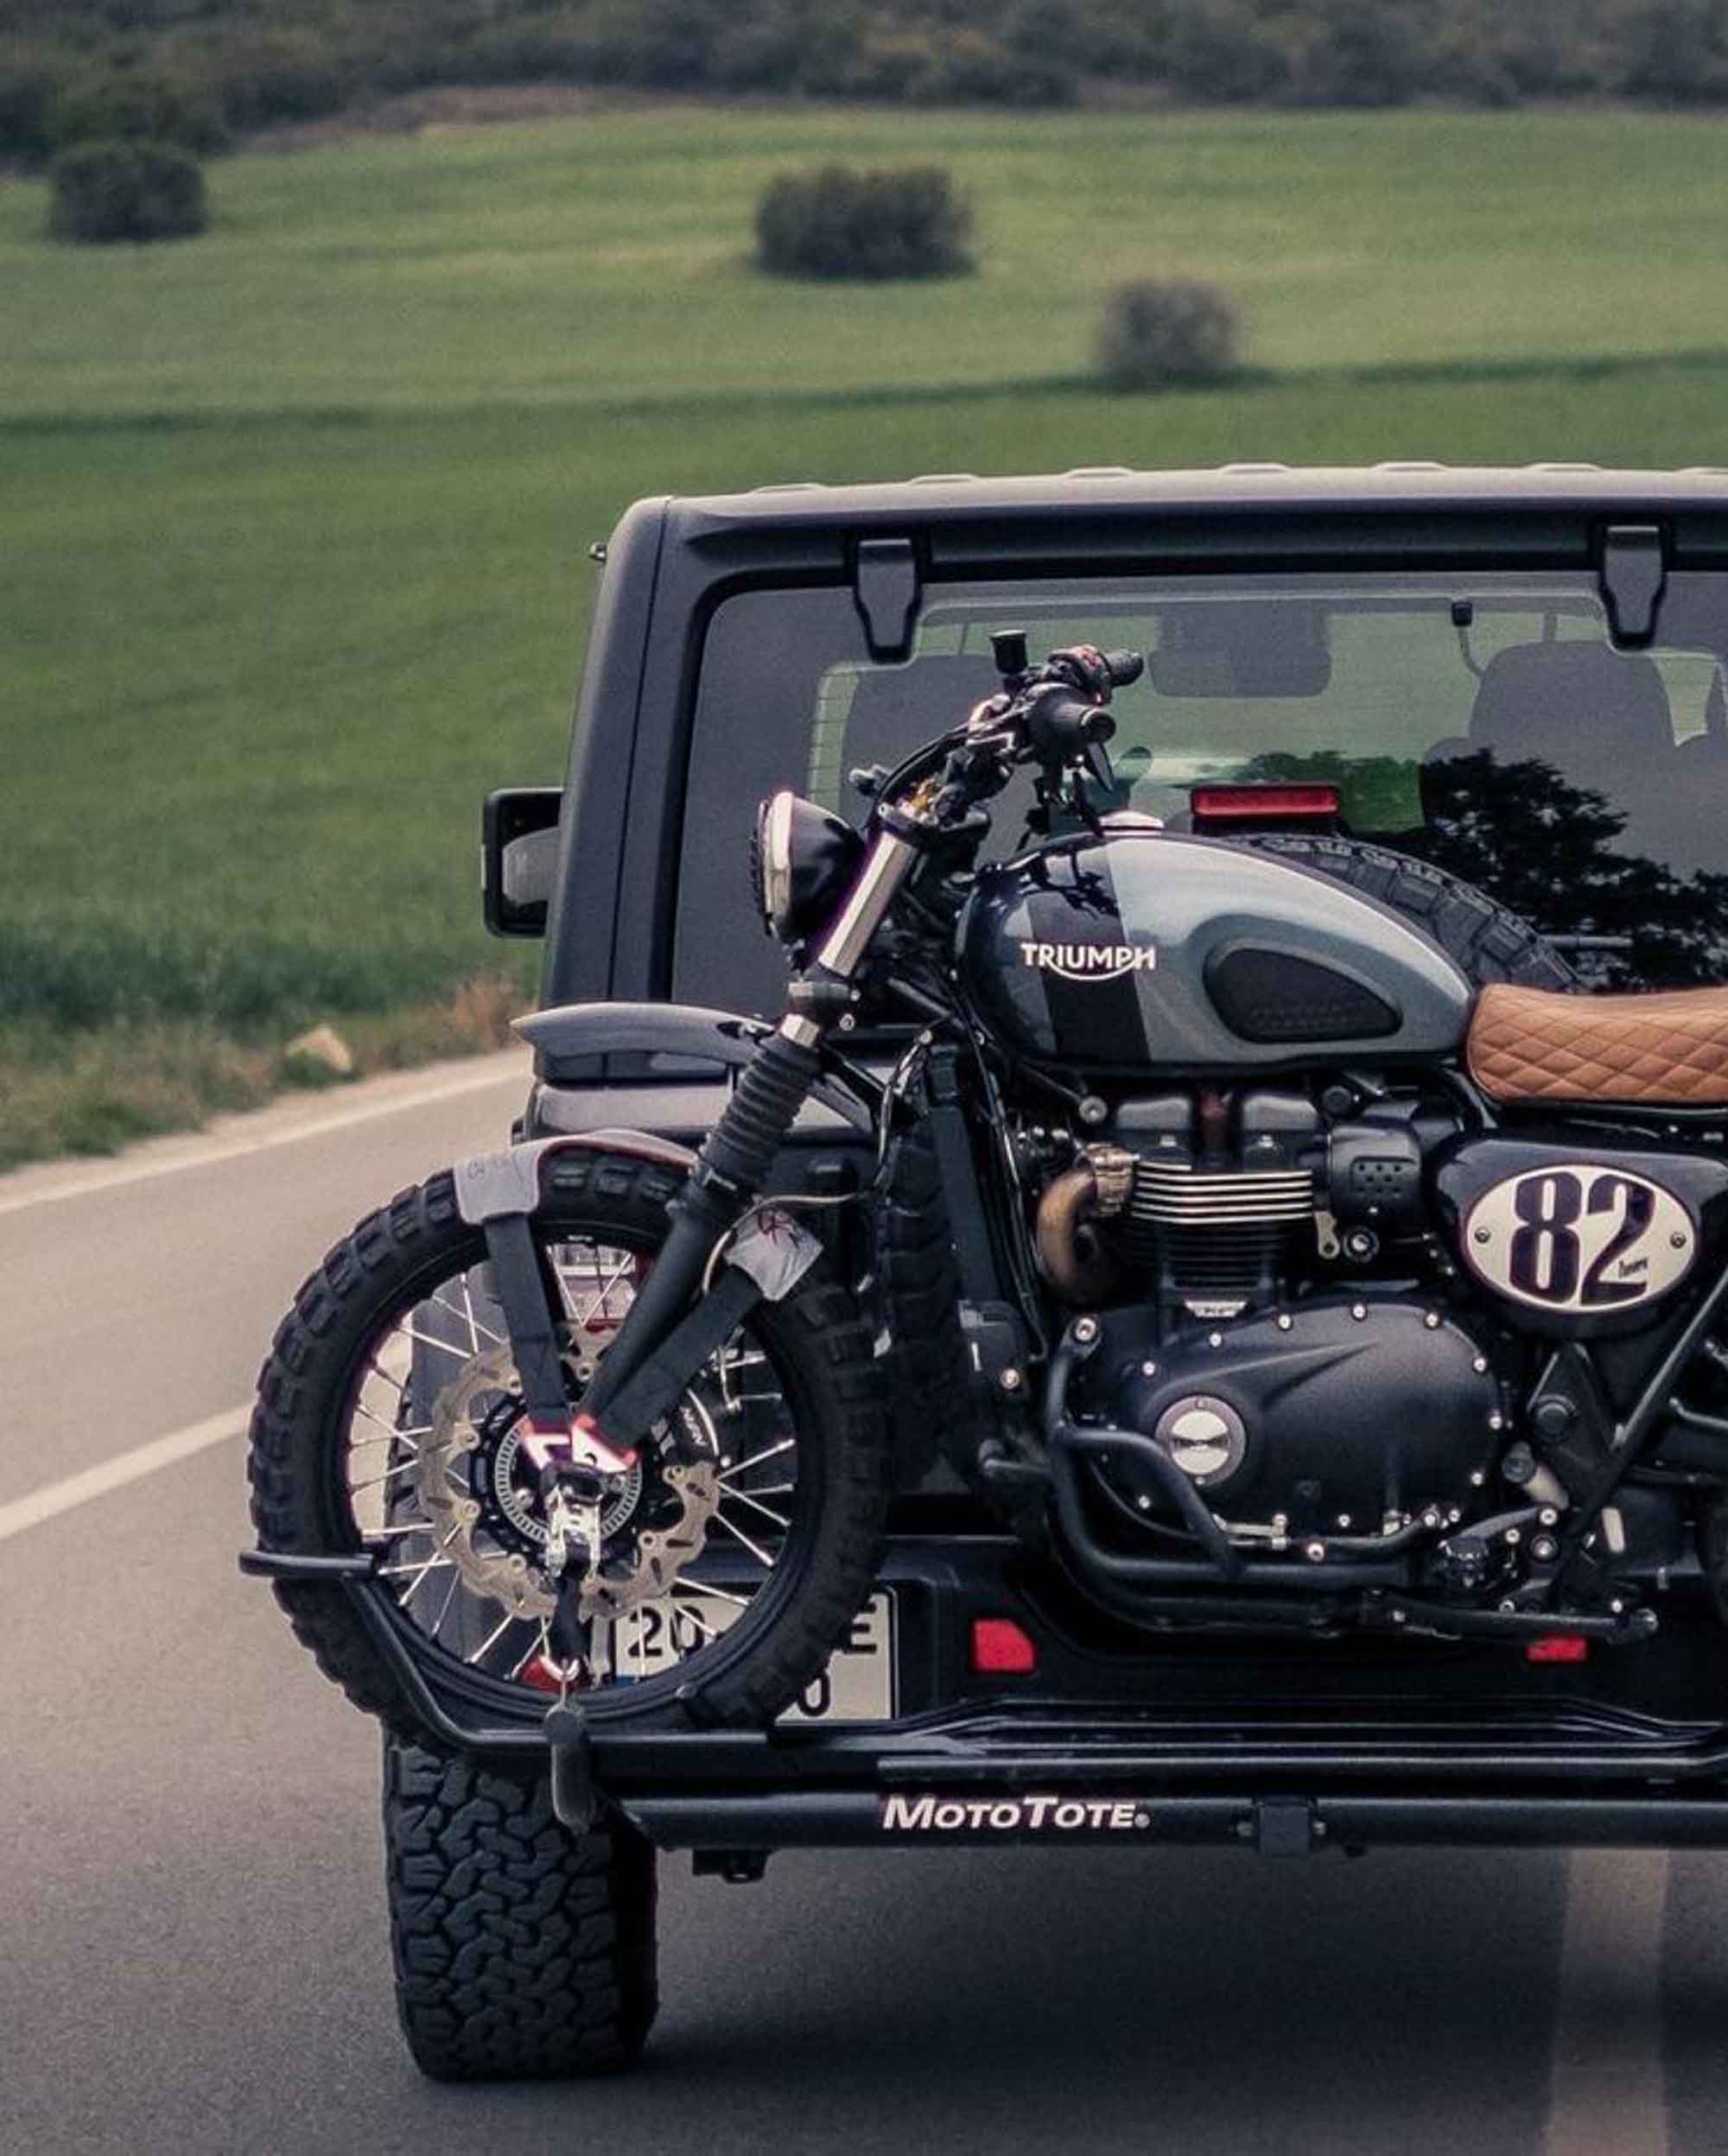 Triumph Scrambler on a Hitch Mount Motorcycle Carrier